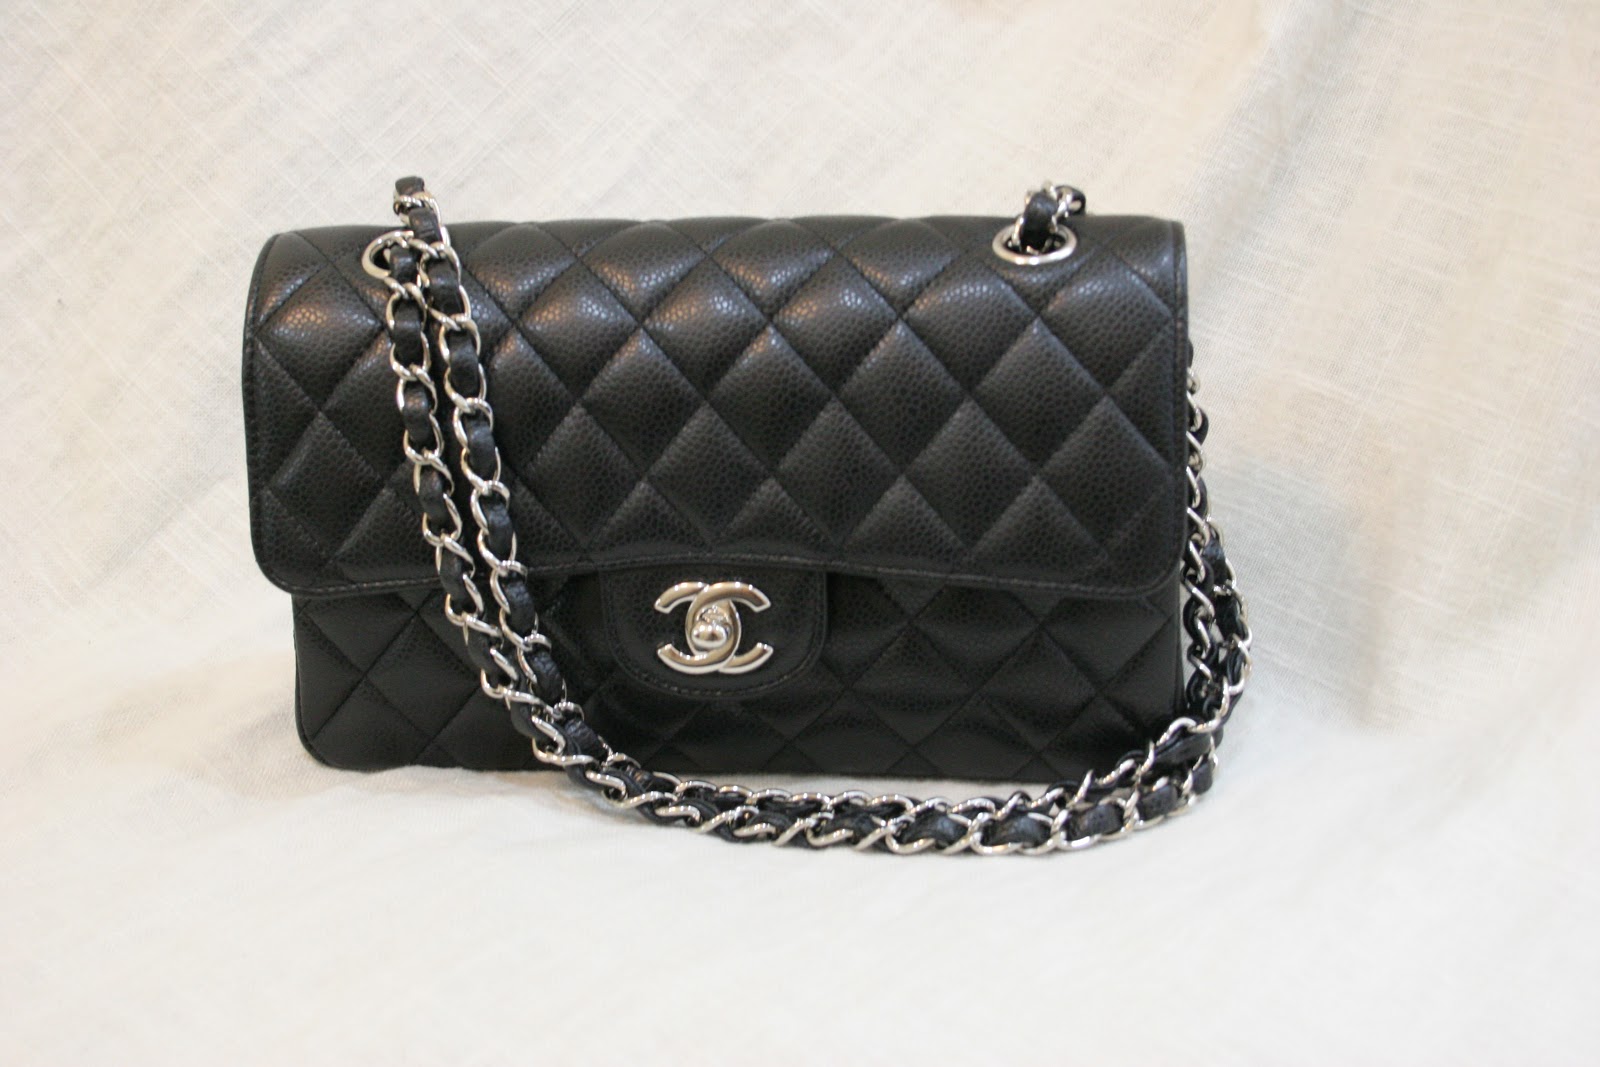 ... Chanel 2.55 Medium Classic Flap Bag in Black Caviar Quilted Leather